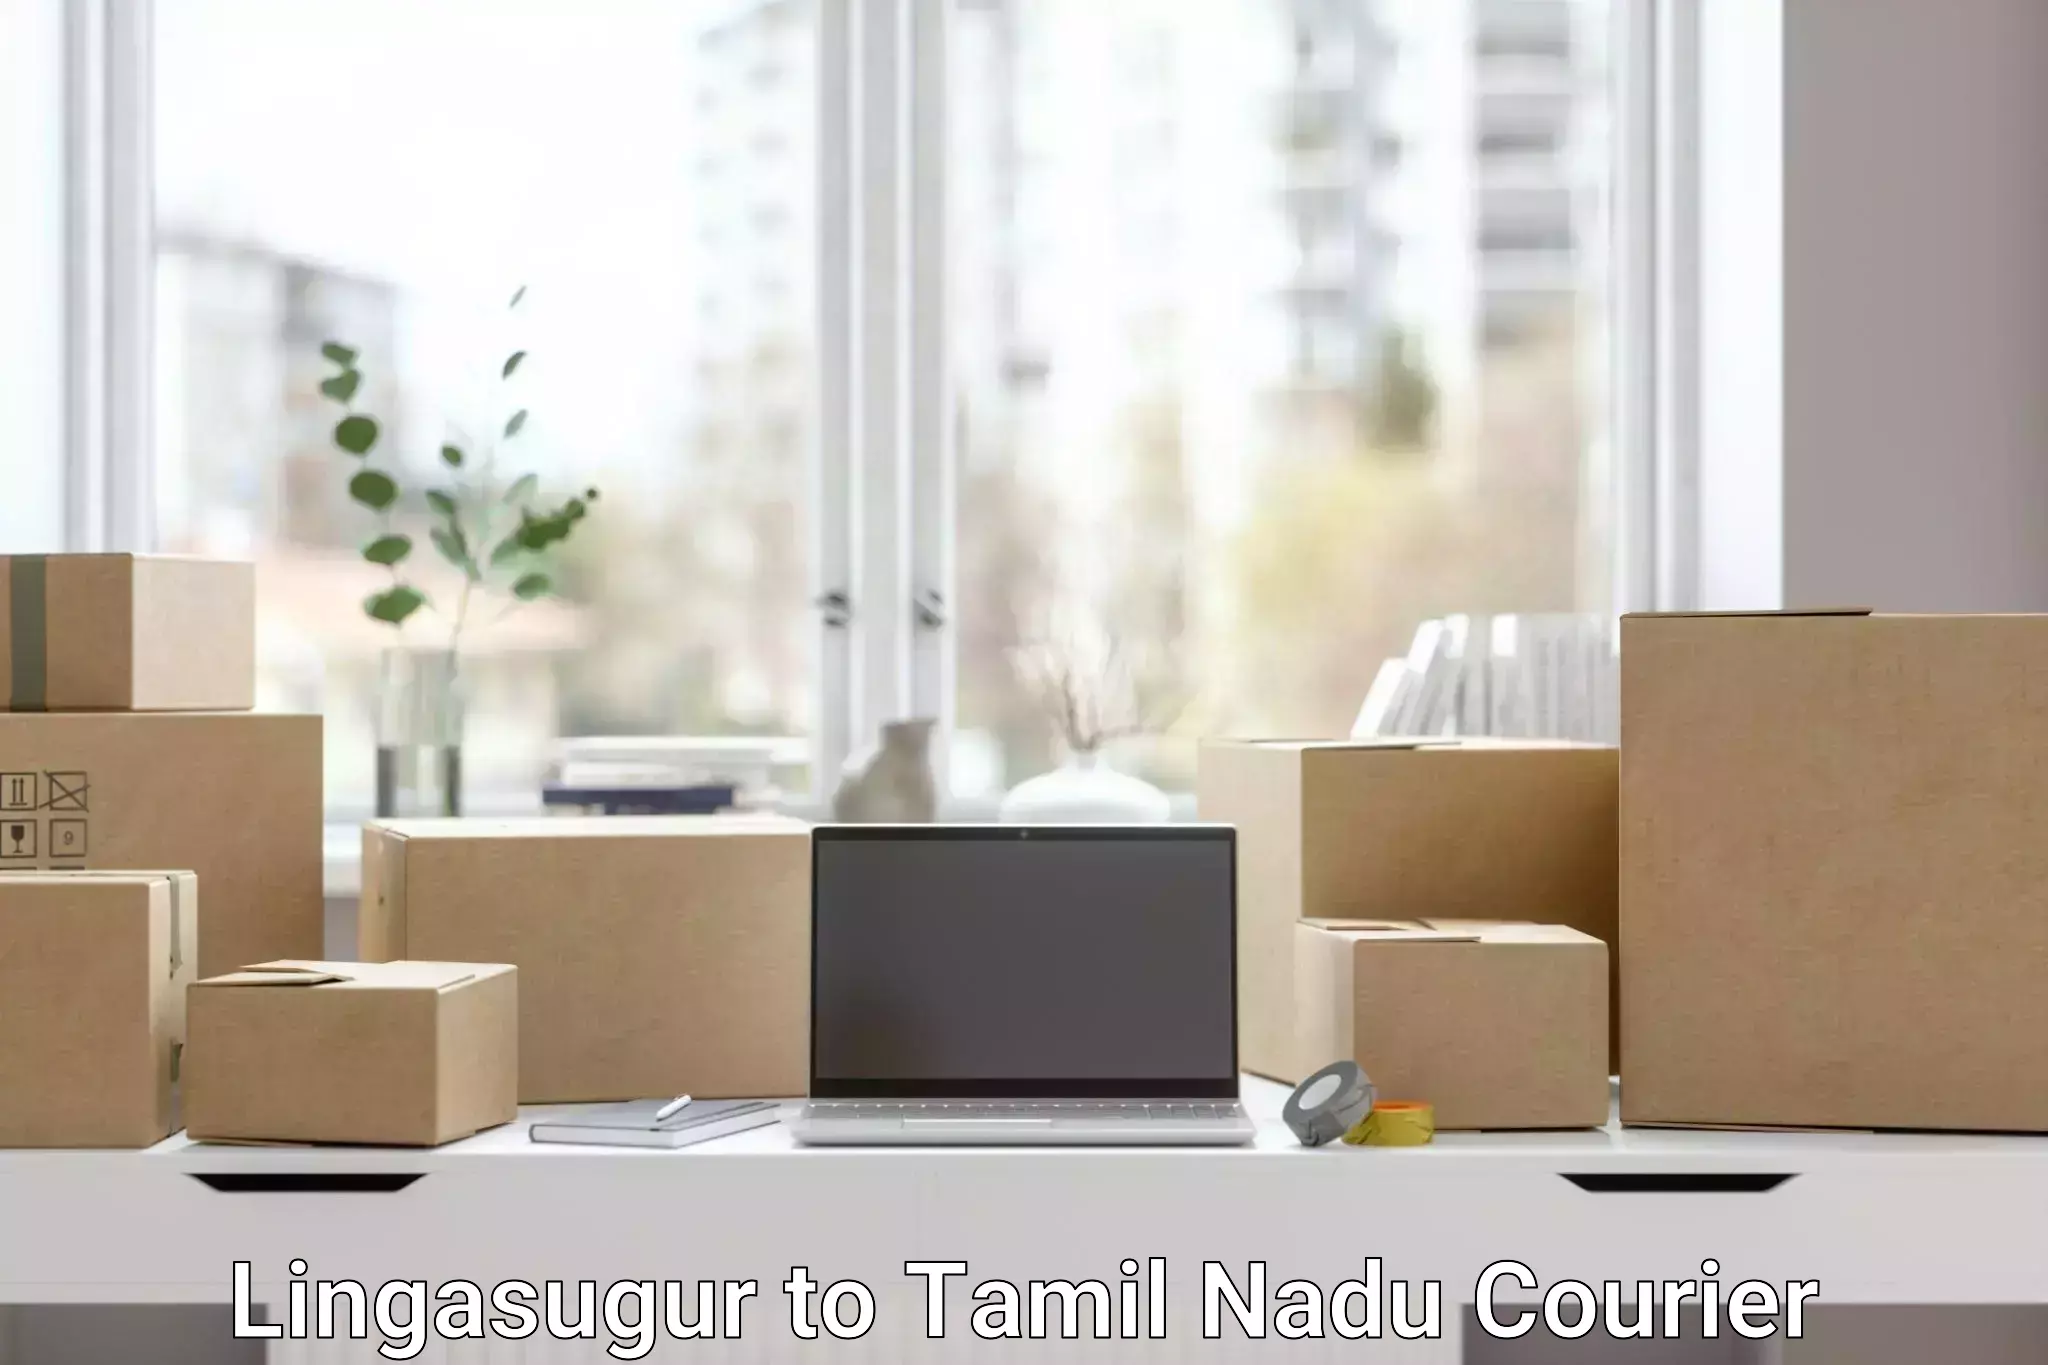 Courier tracking online Lingasugur to Melmaruvathur